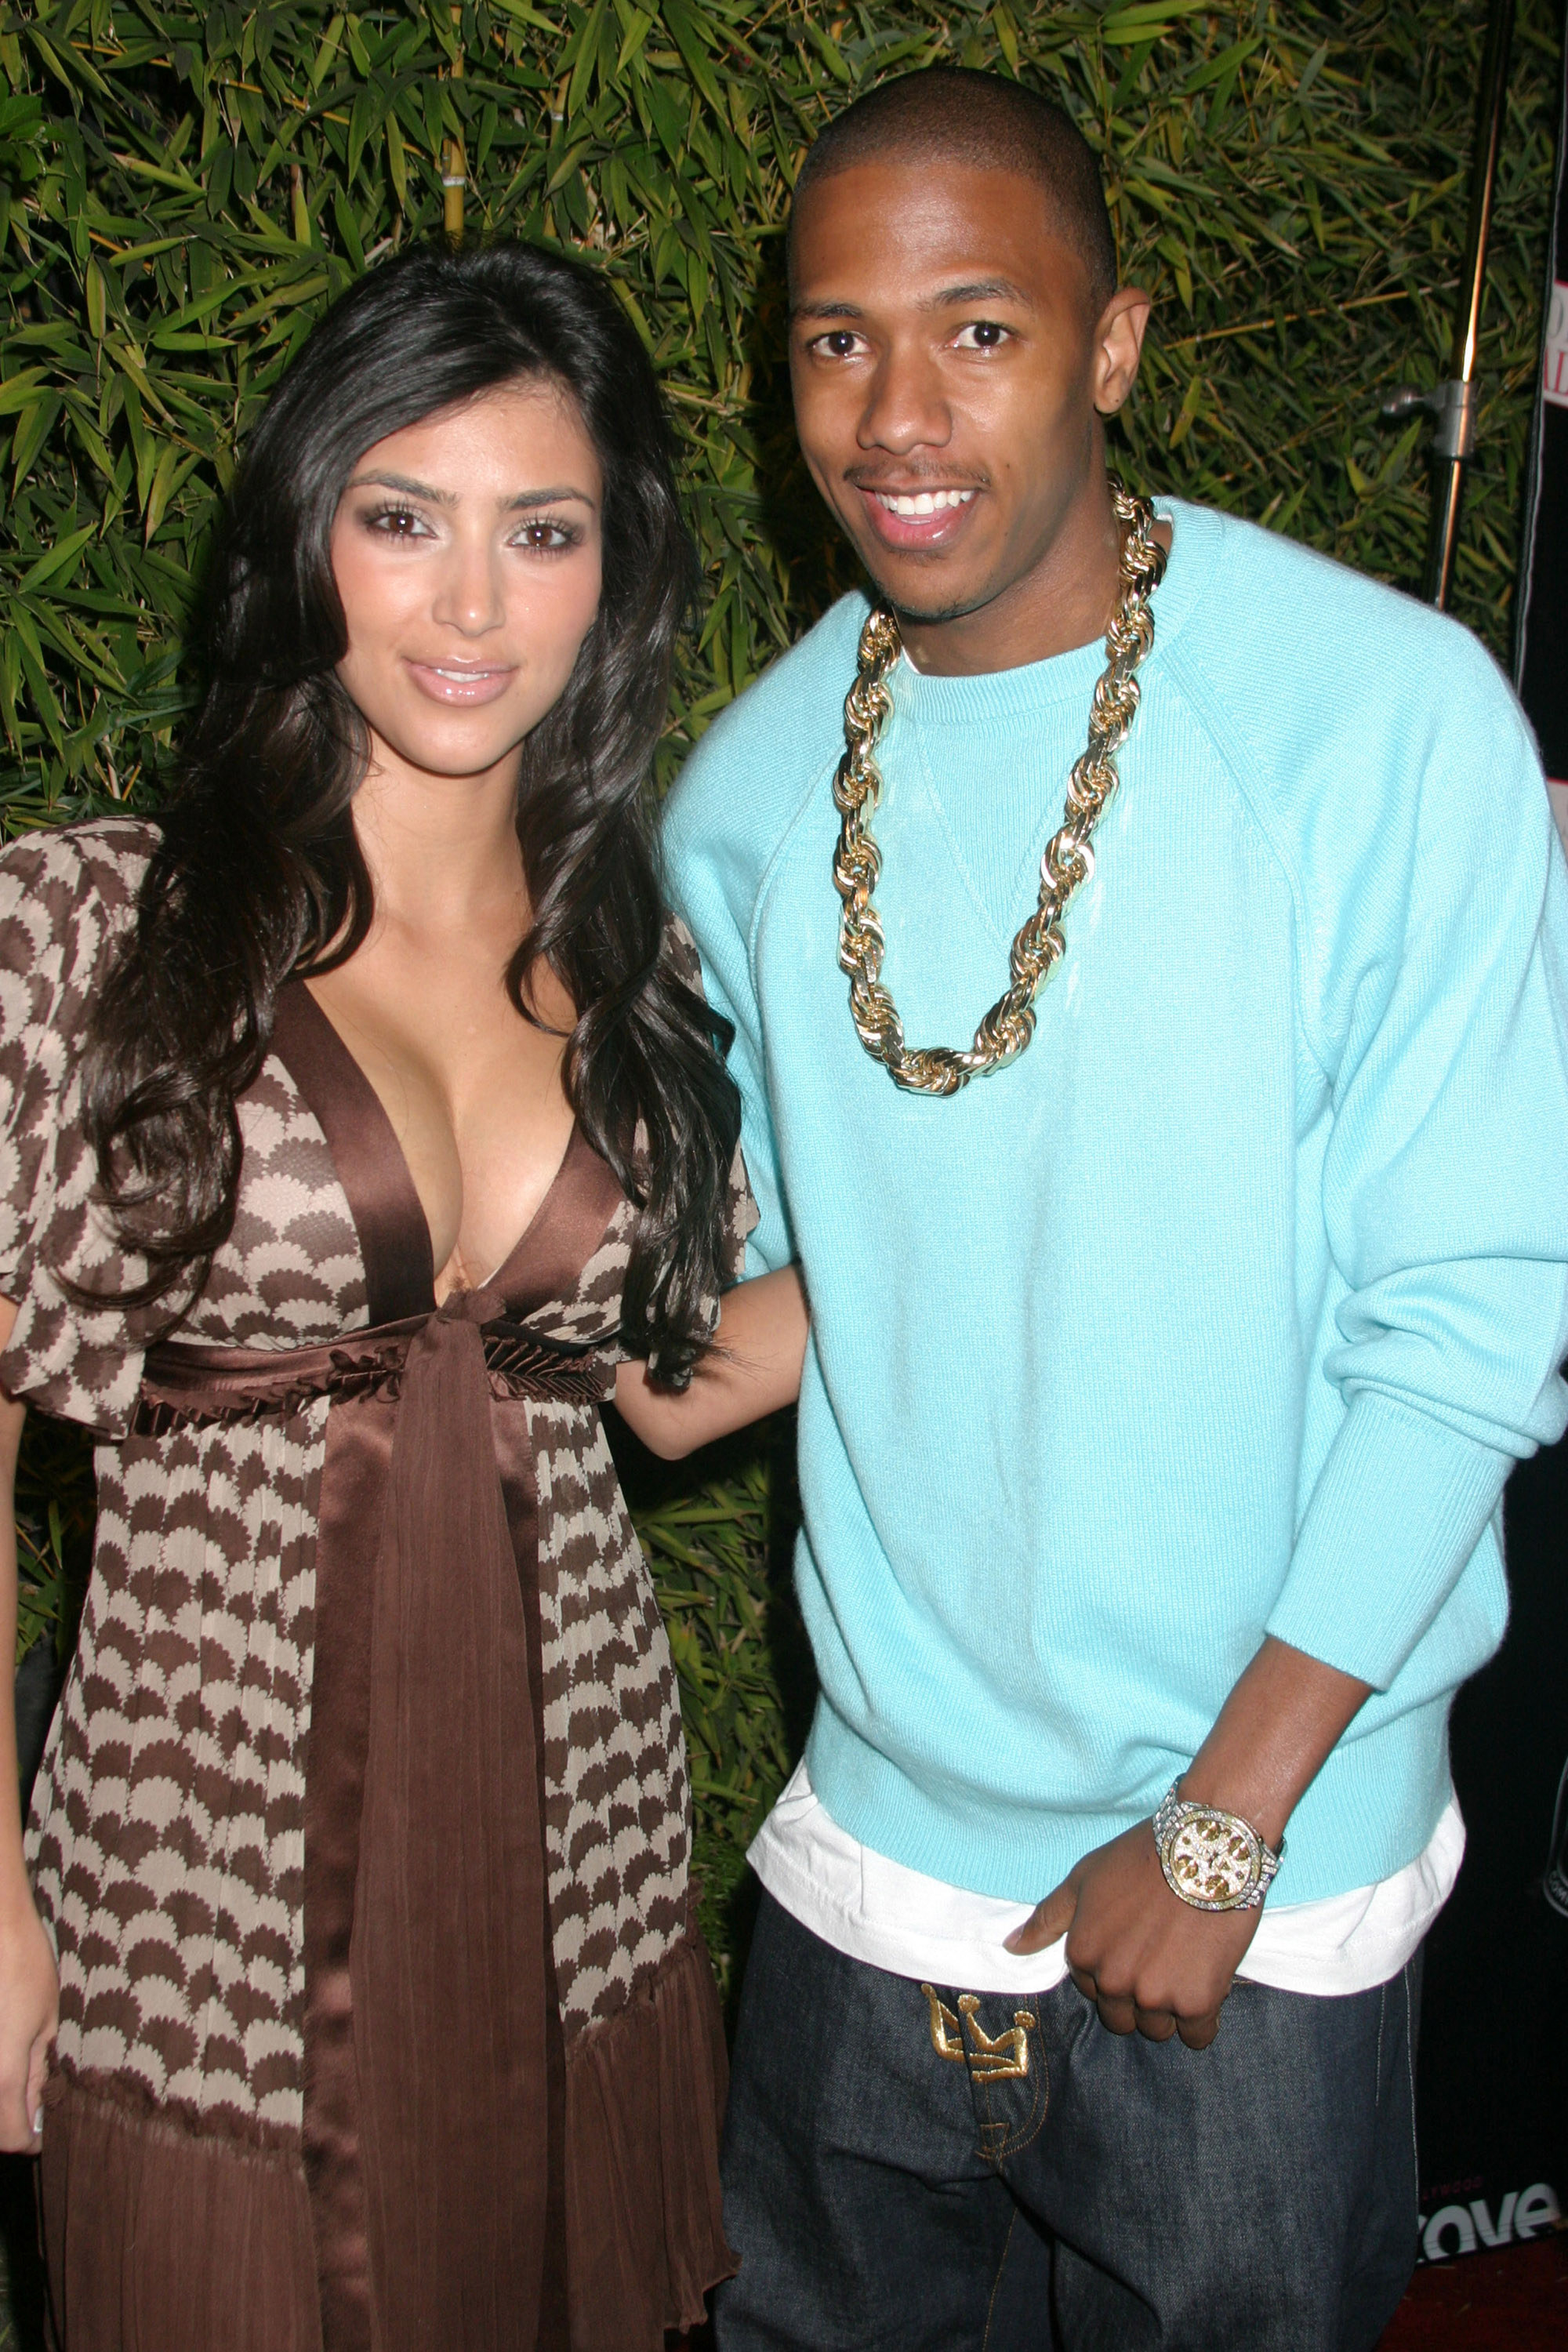 Kim Kardashian in a wrap dress standing next to Nick Cannon in a sweater and pants as they smile for the camera